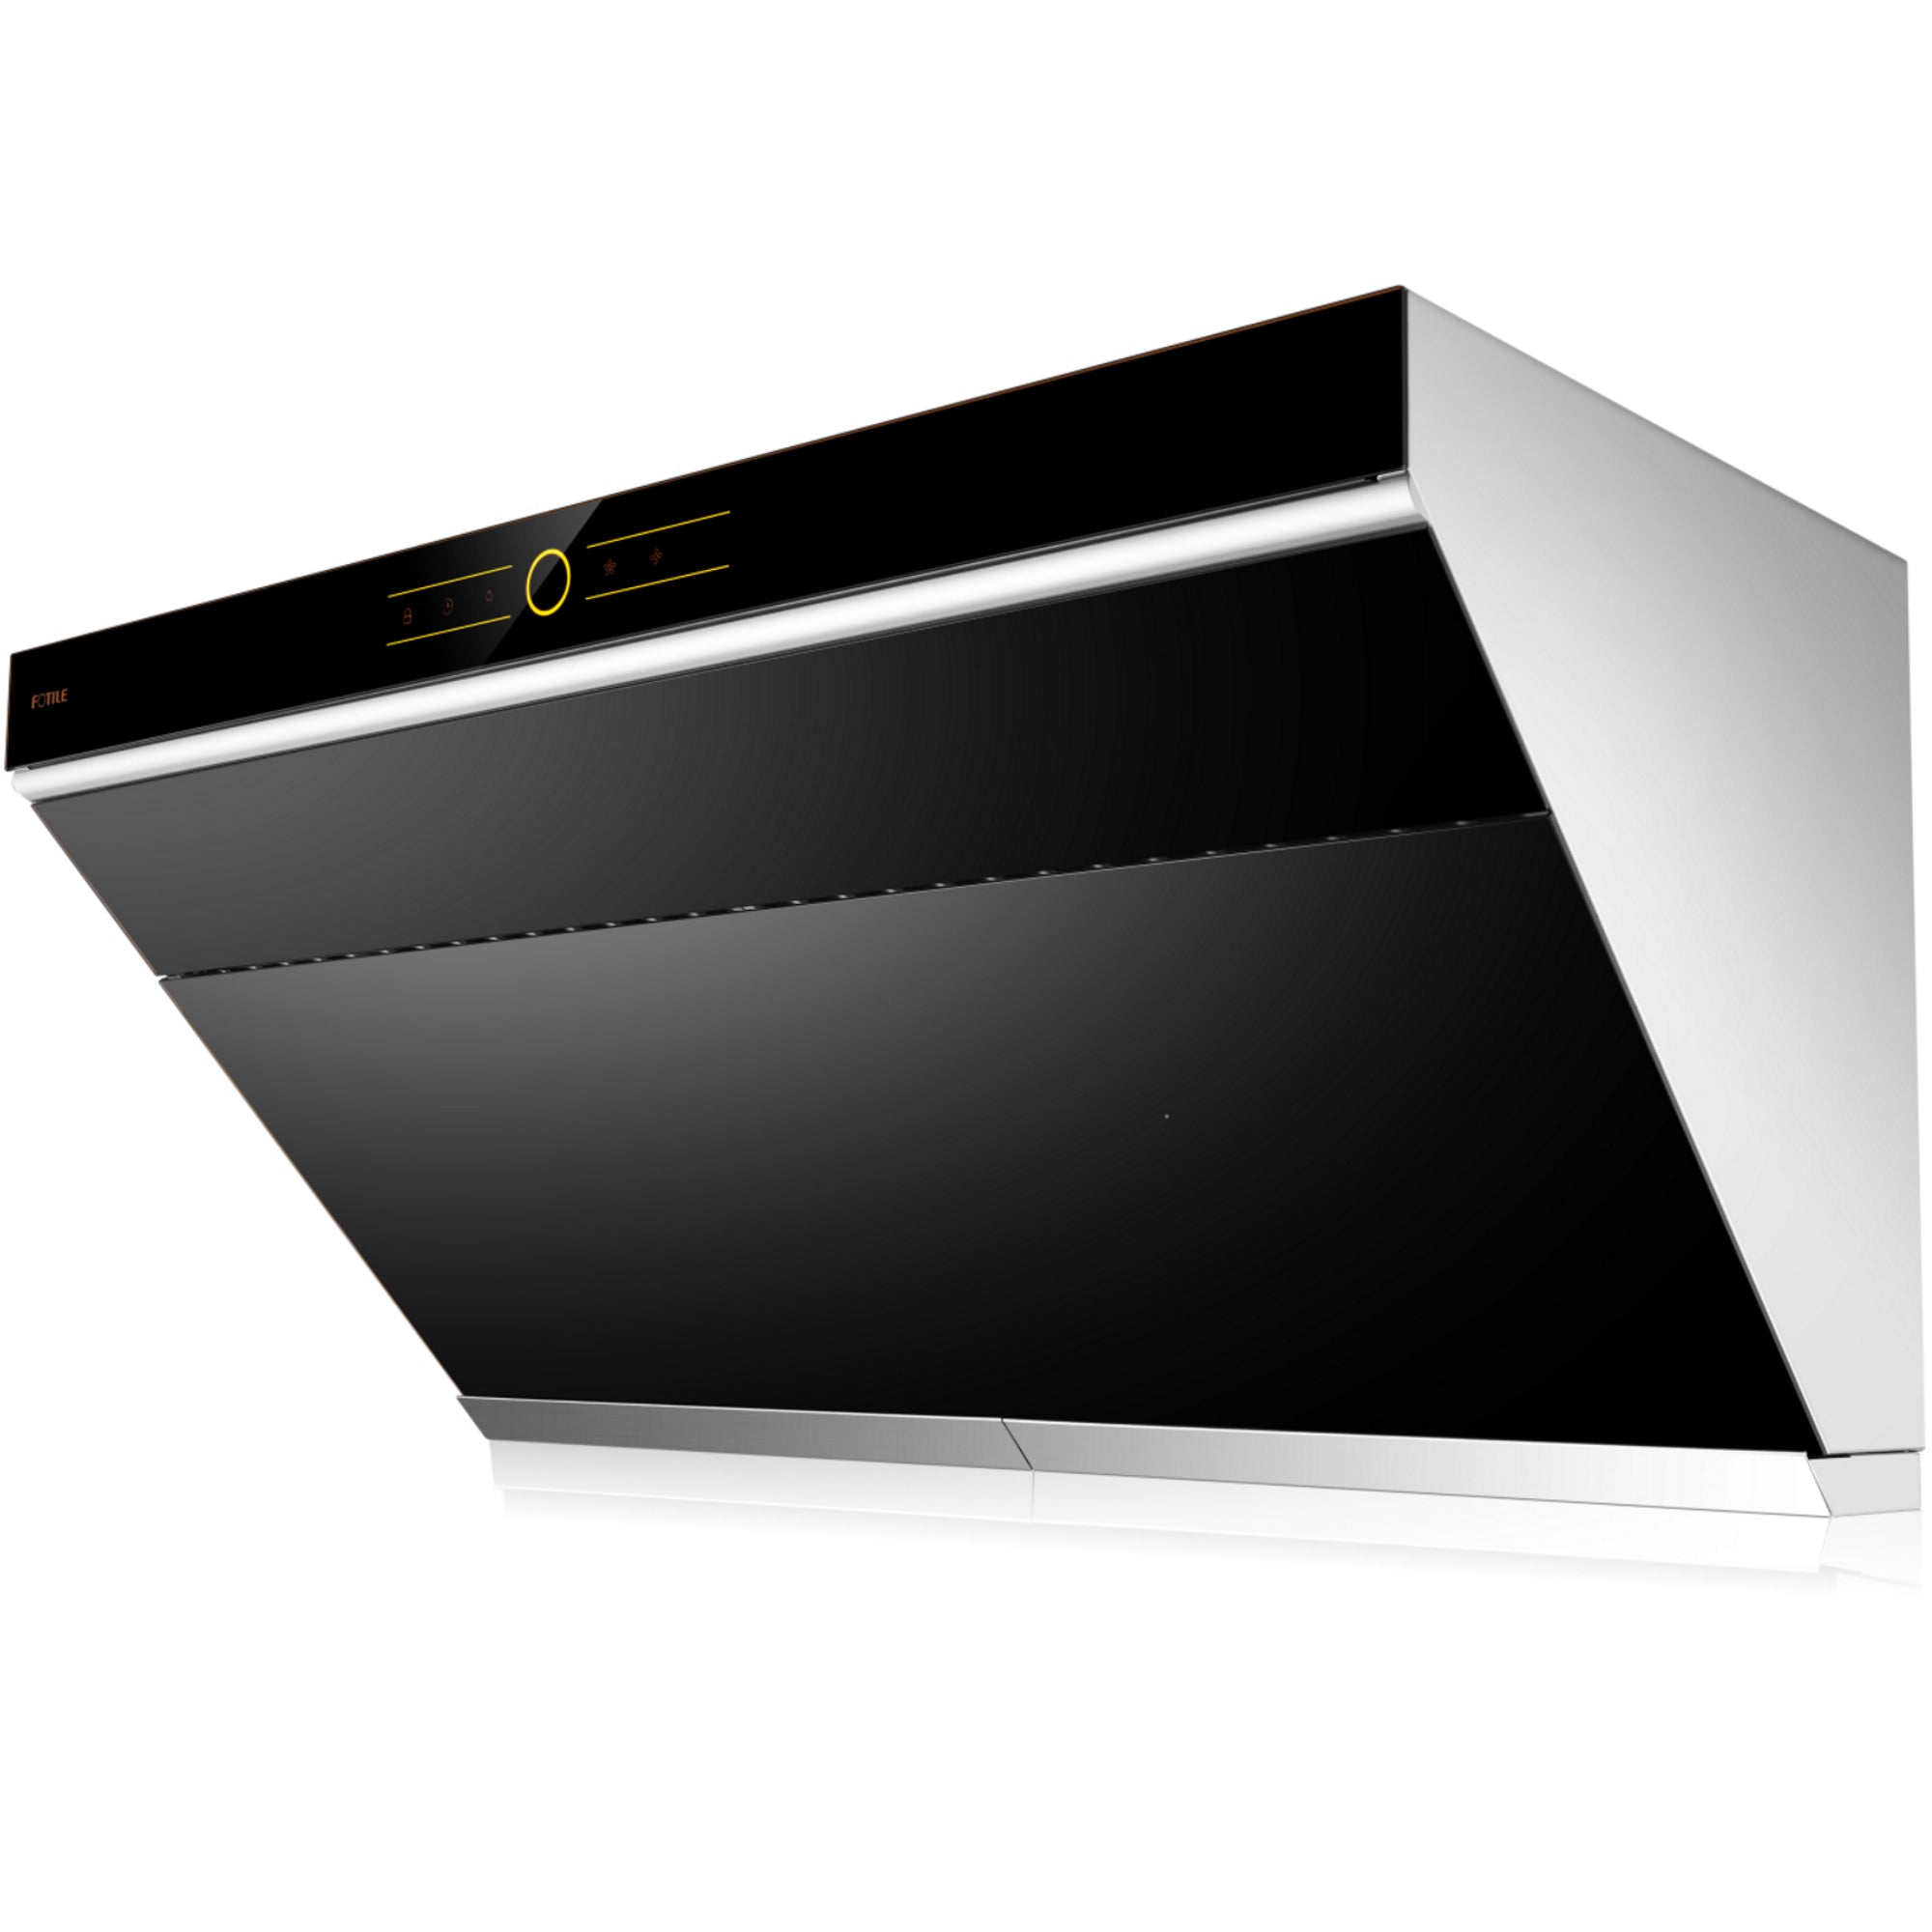 Fotile Slant Vent Series 36 in. 850 CFM Wall Mount Range Hood with Touchscreen in Onyx Black Tempered Glass (JQG9001)